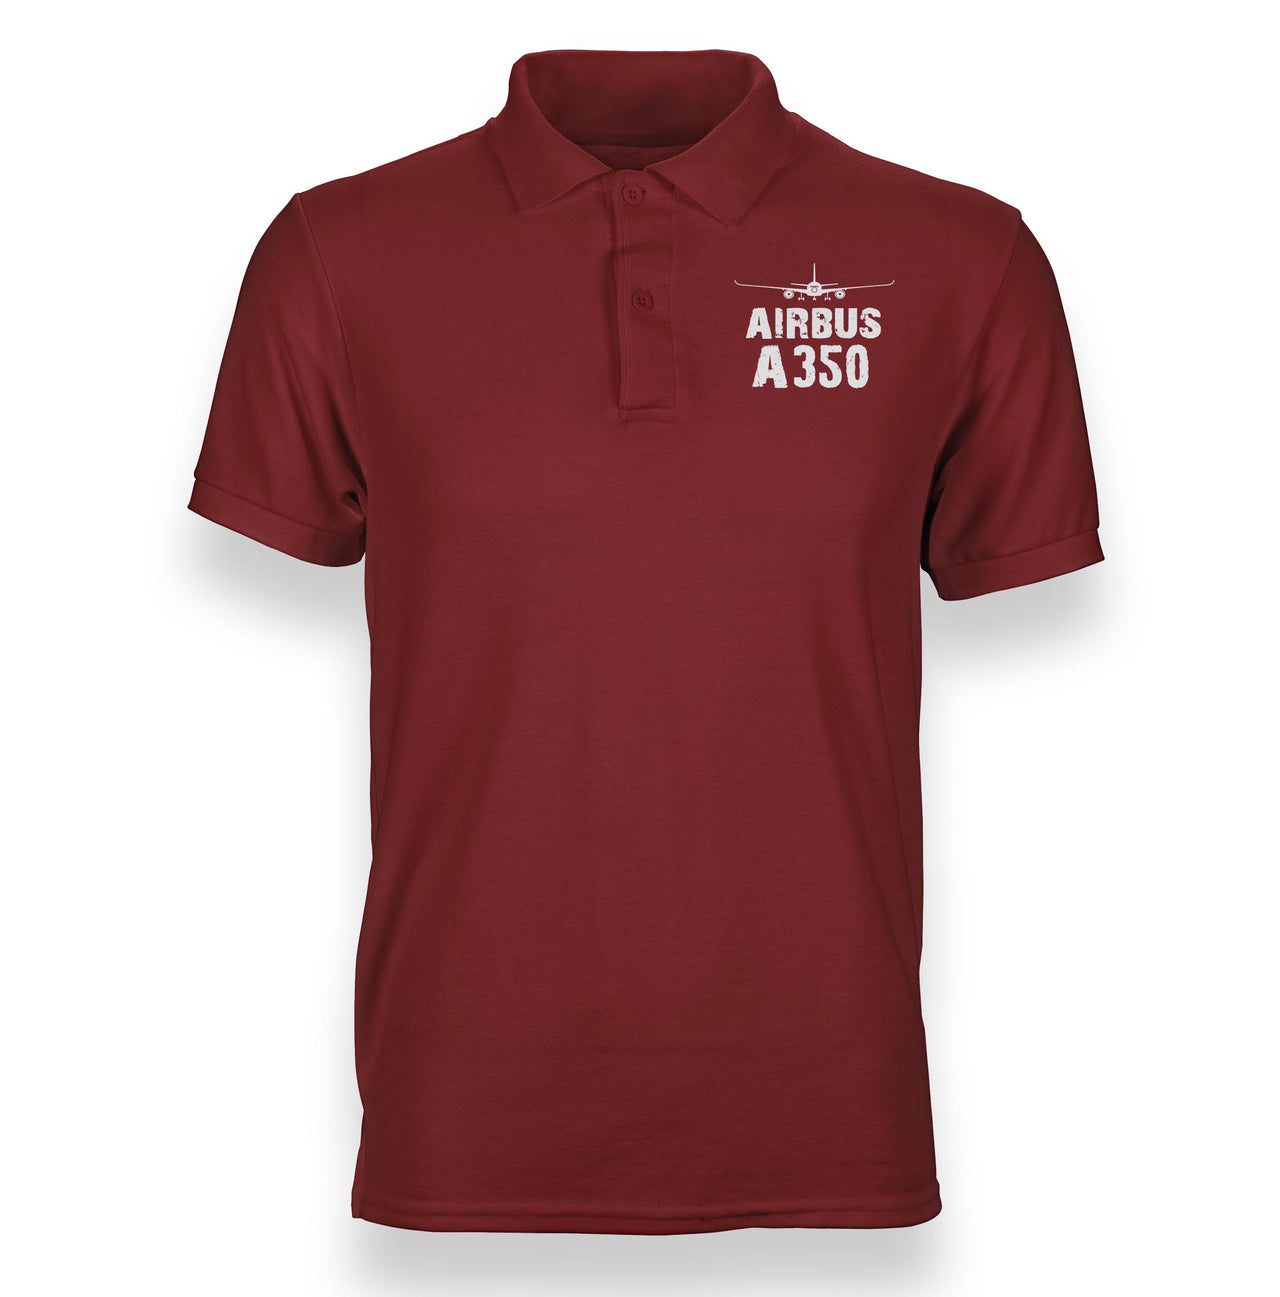 Airbus A350 & Plane Designed Polo T-Shirts